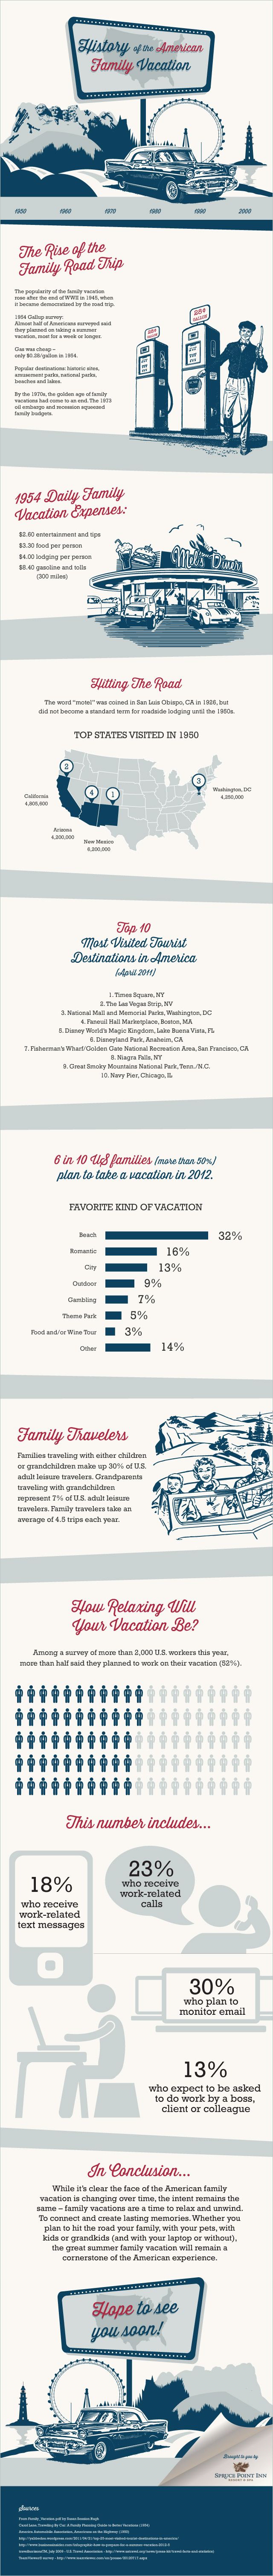 History of the American Family Vacation